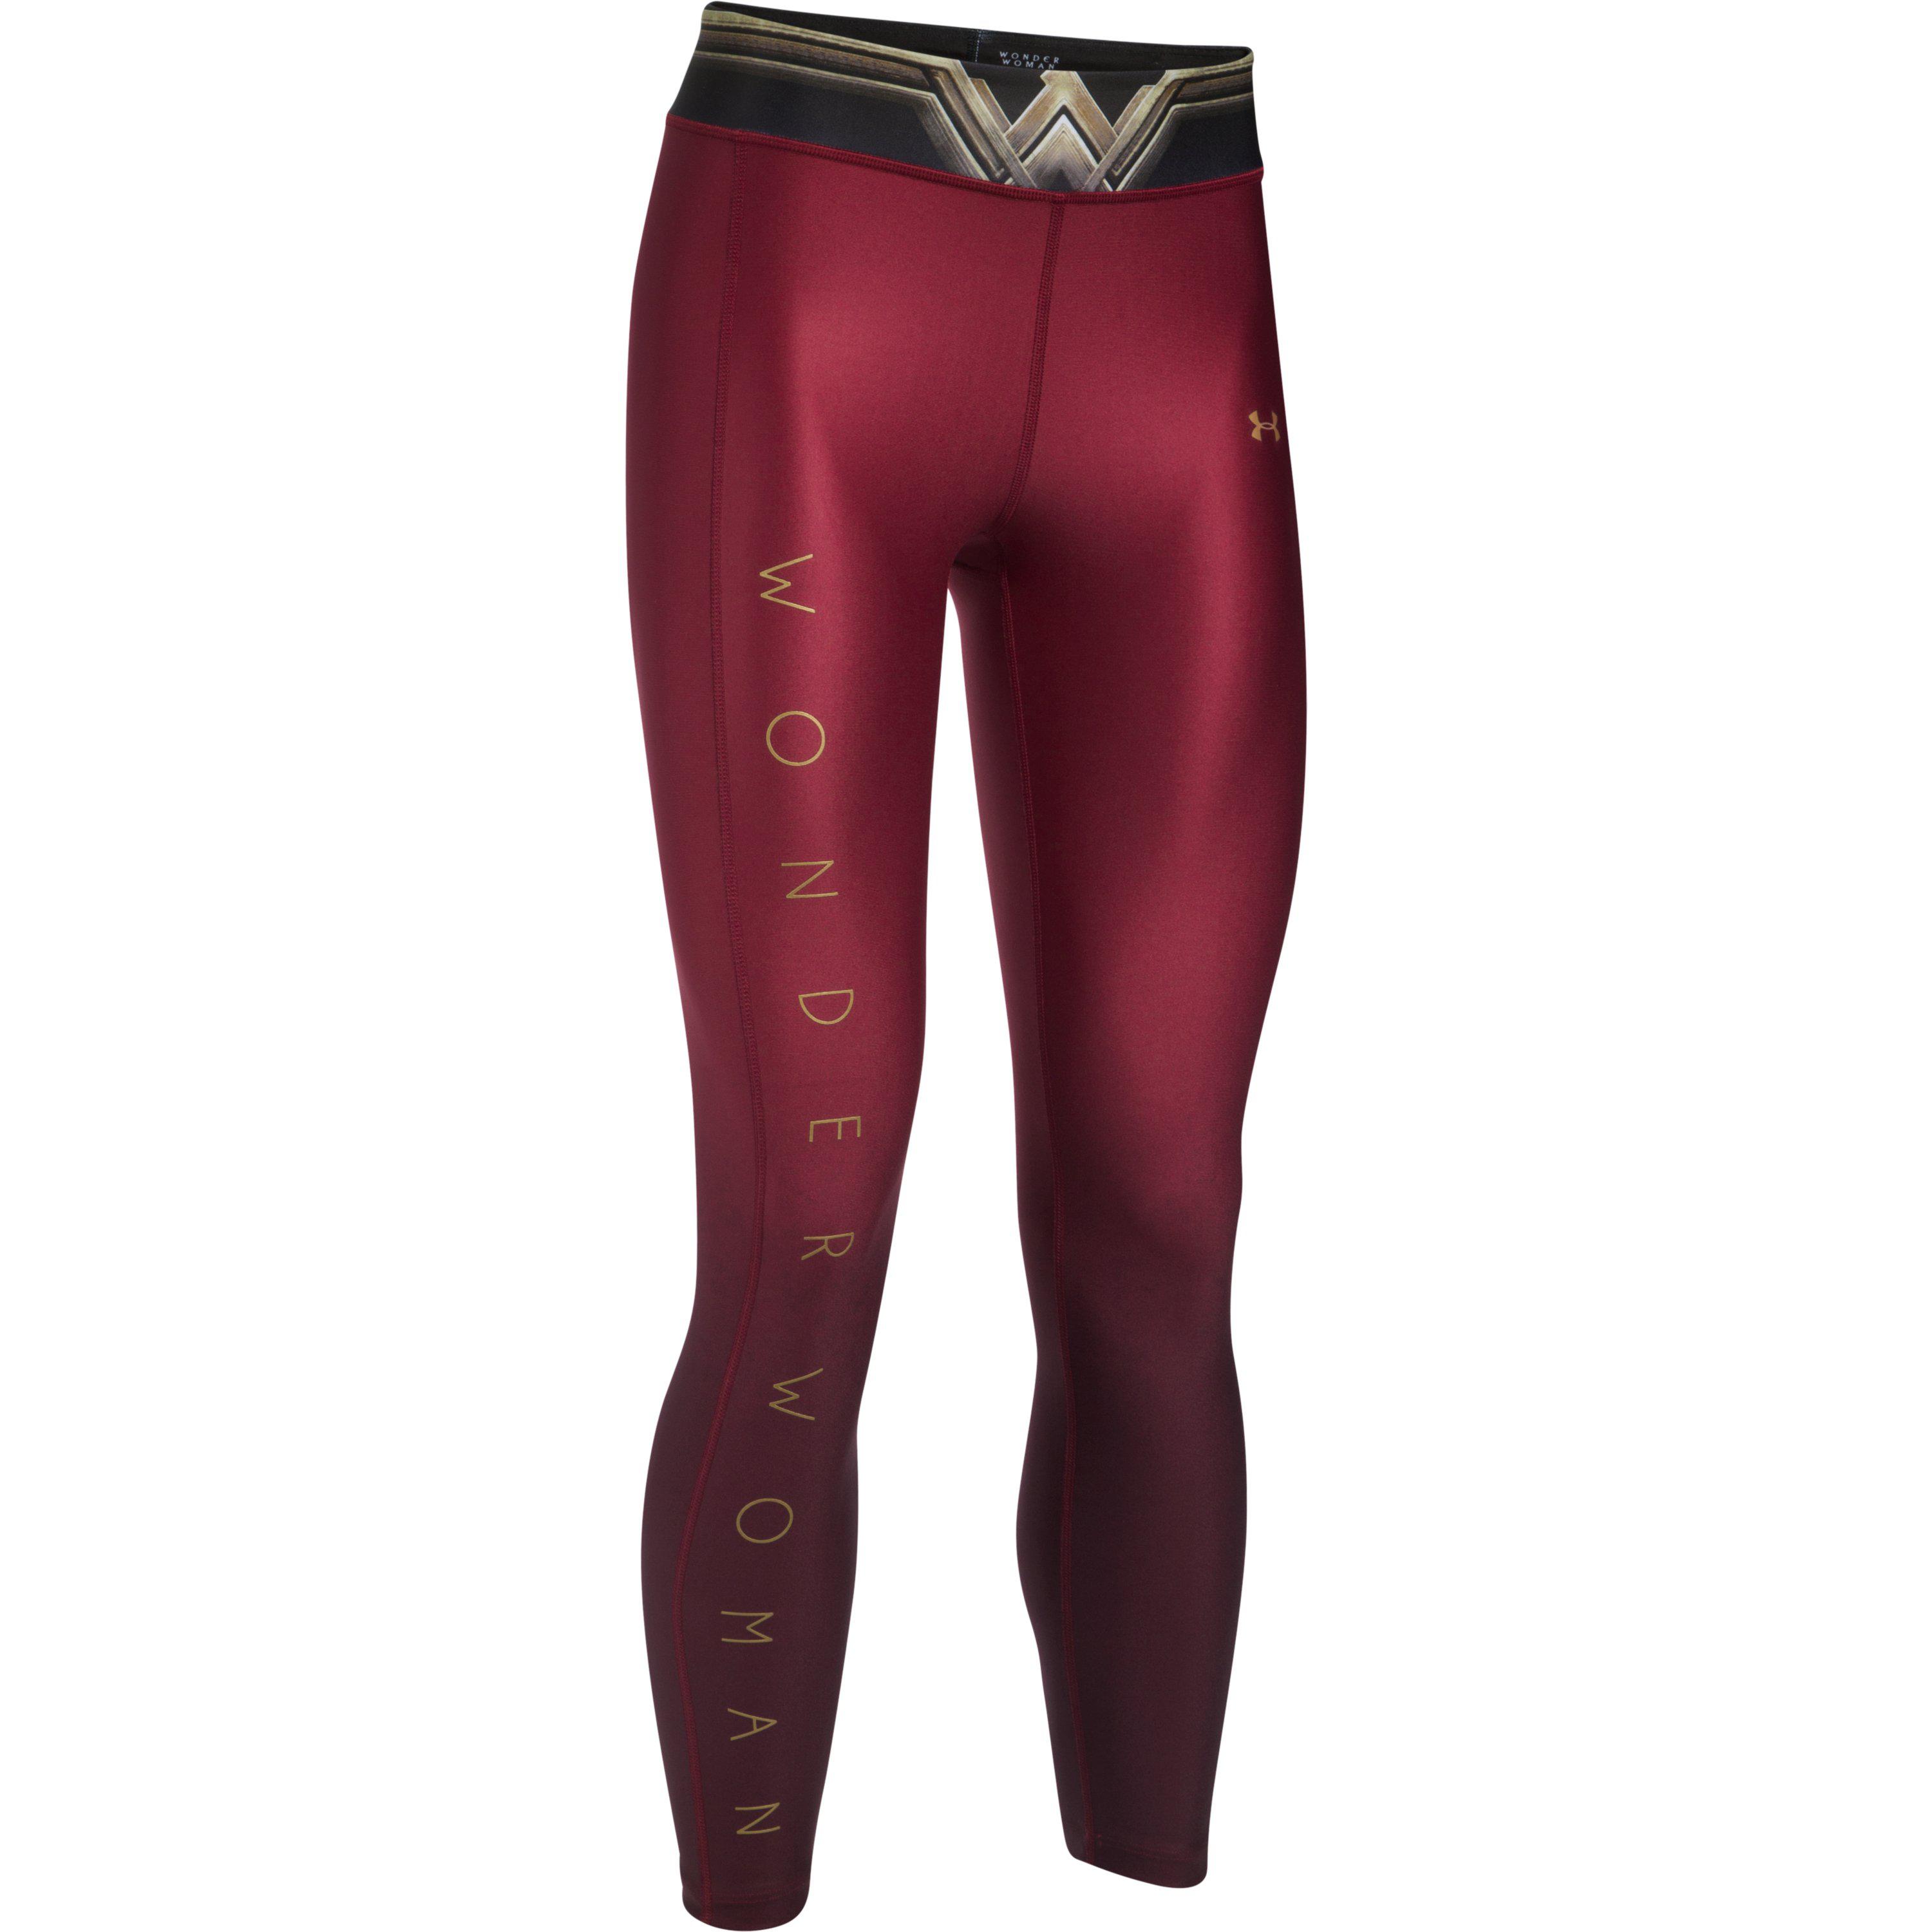 Under Armour Women's ® Alter Ego Wonder Woman Ankle Crop in Red